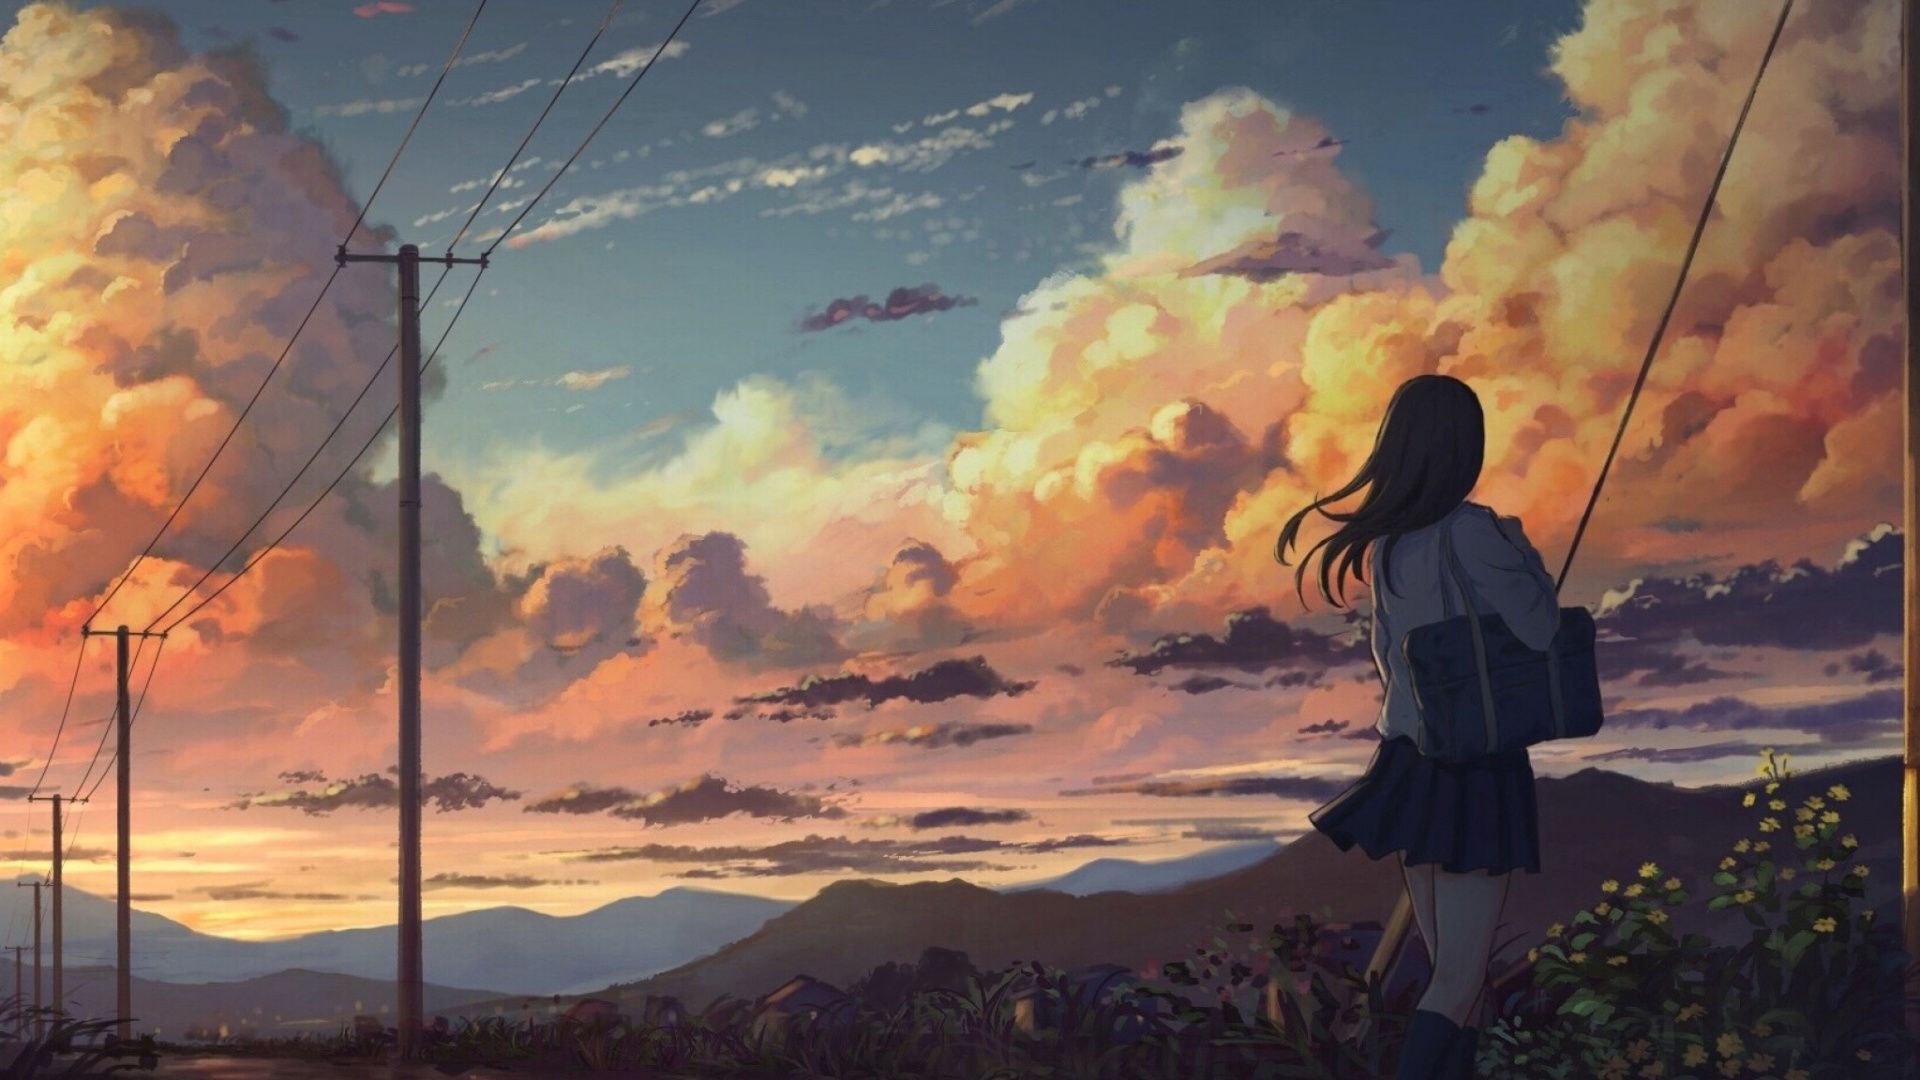 Painting, Anime, Atmosphere, Sunlight, Theatrical Scenery